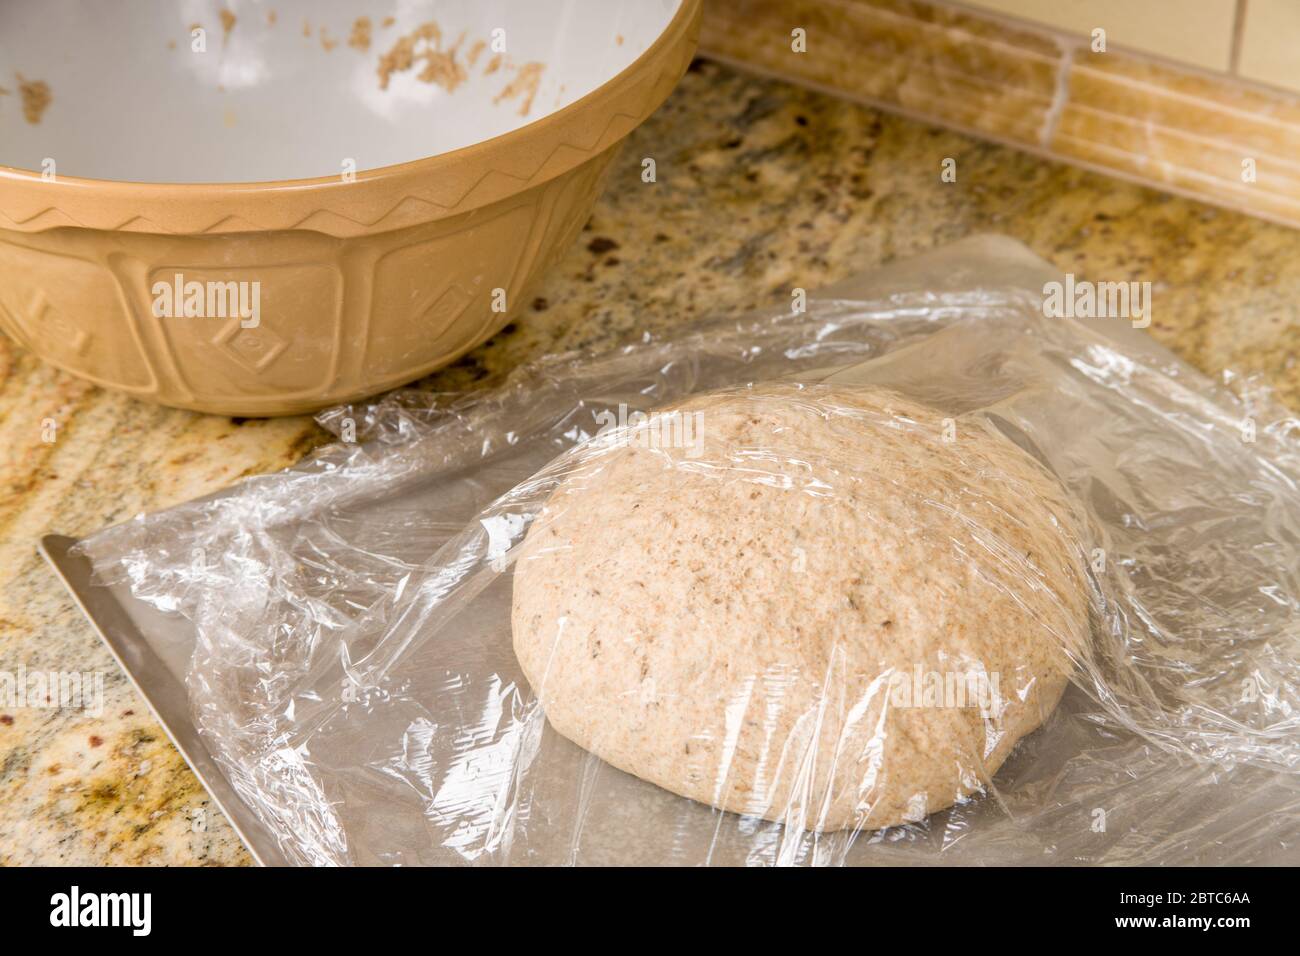 Bread may rise on the countertop if the temperature is 80 - 95 degrees Farenheit, as that is the ideal rising range to achieve the best structure, tex Stock Photo